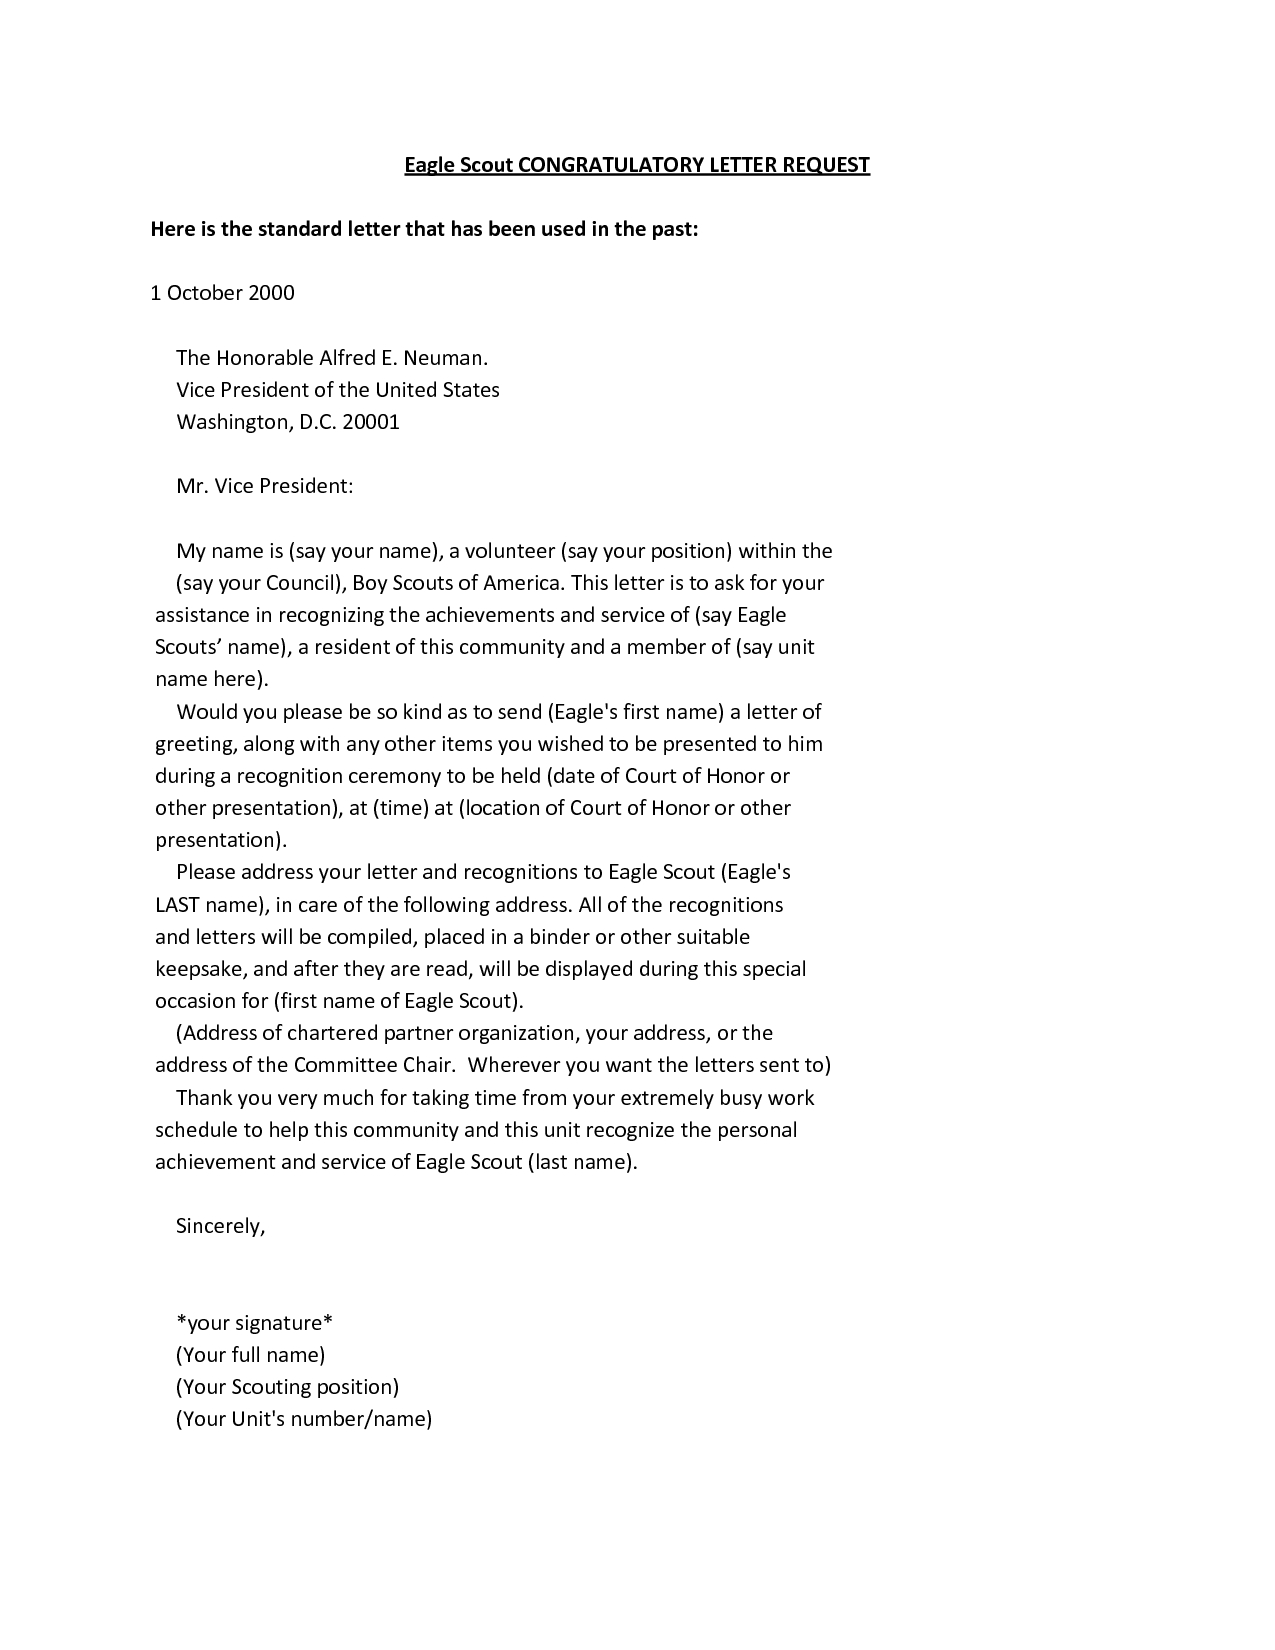 Demand Letter Template - Sample Eagle Scout Letter Of Re Mendation Request Acurnamedia